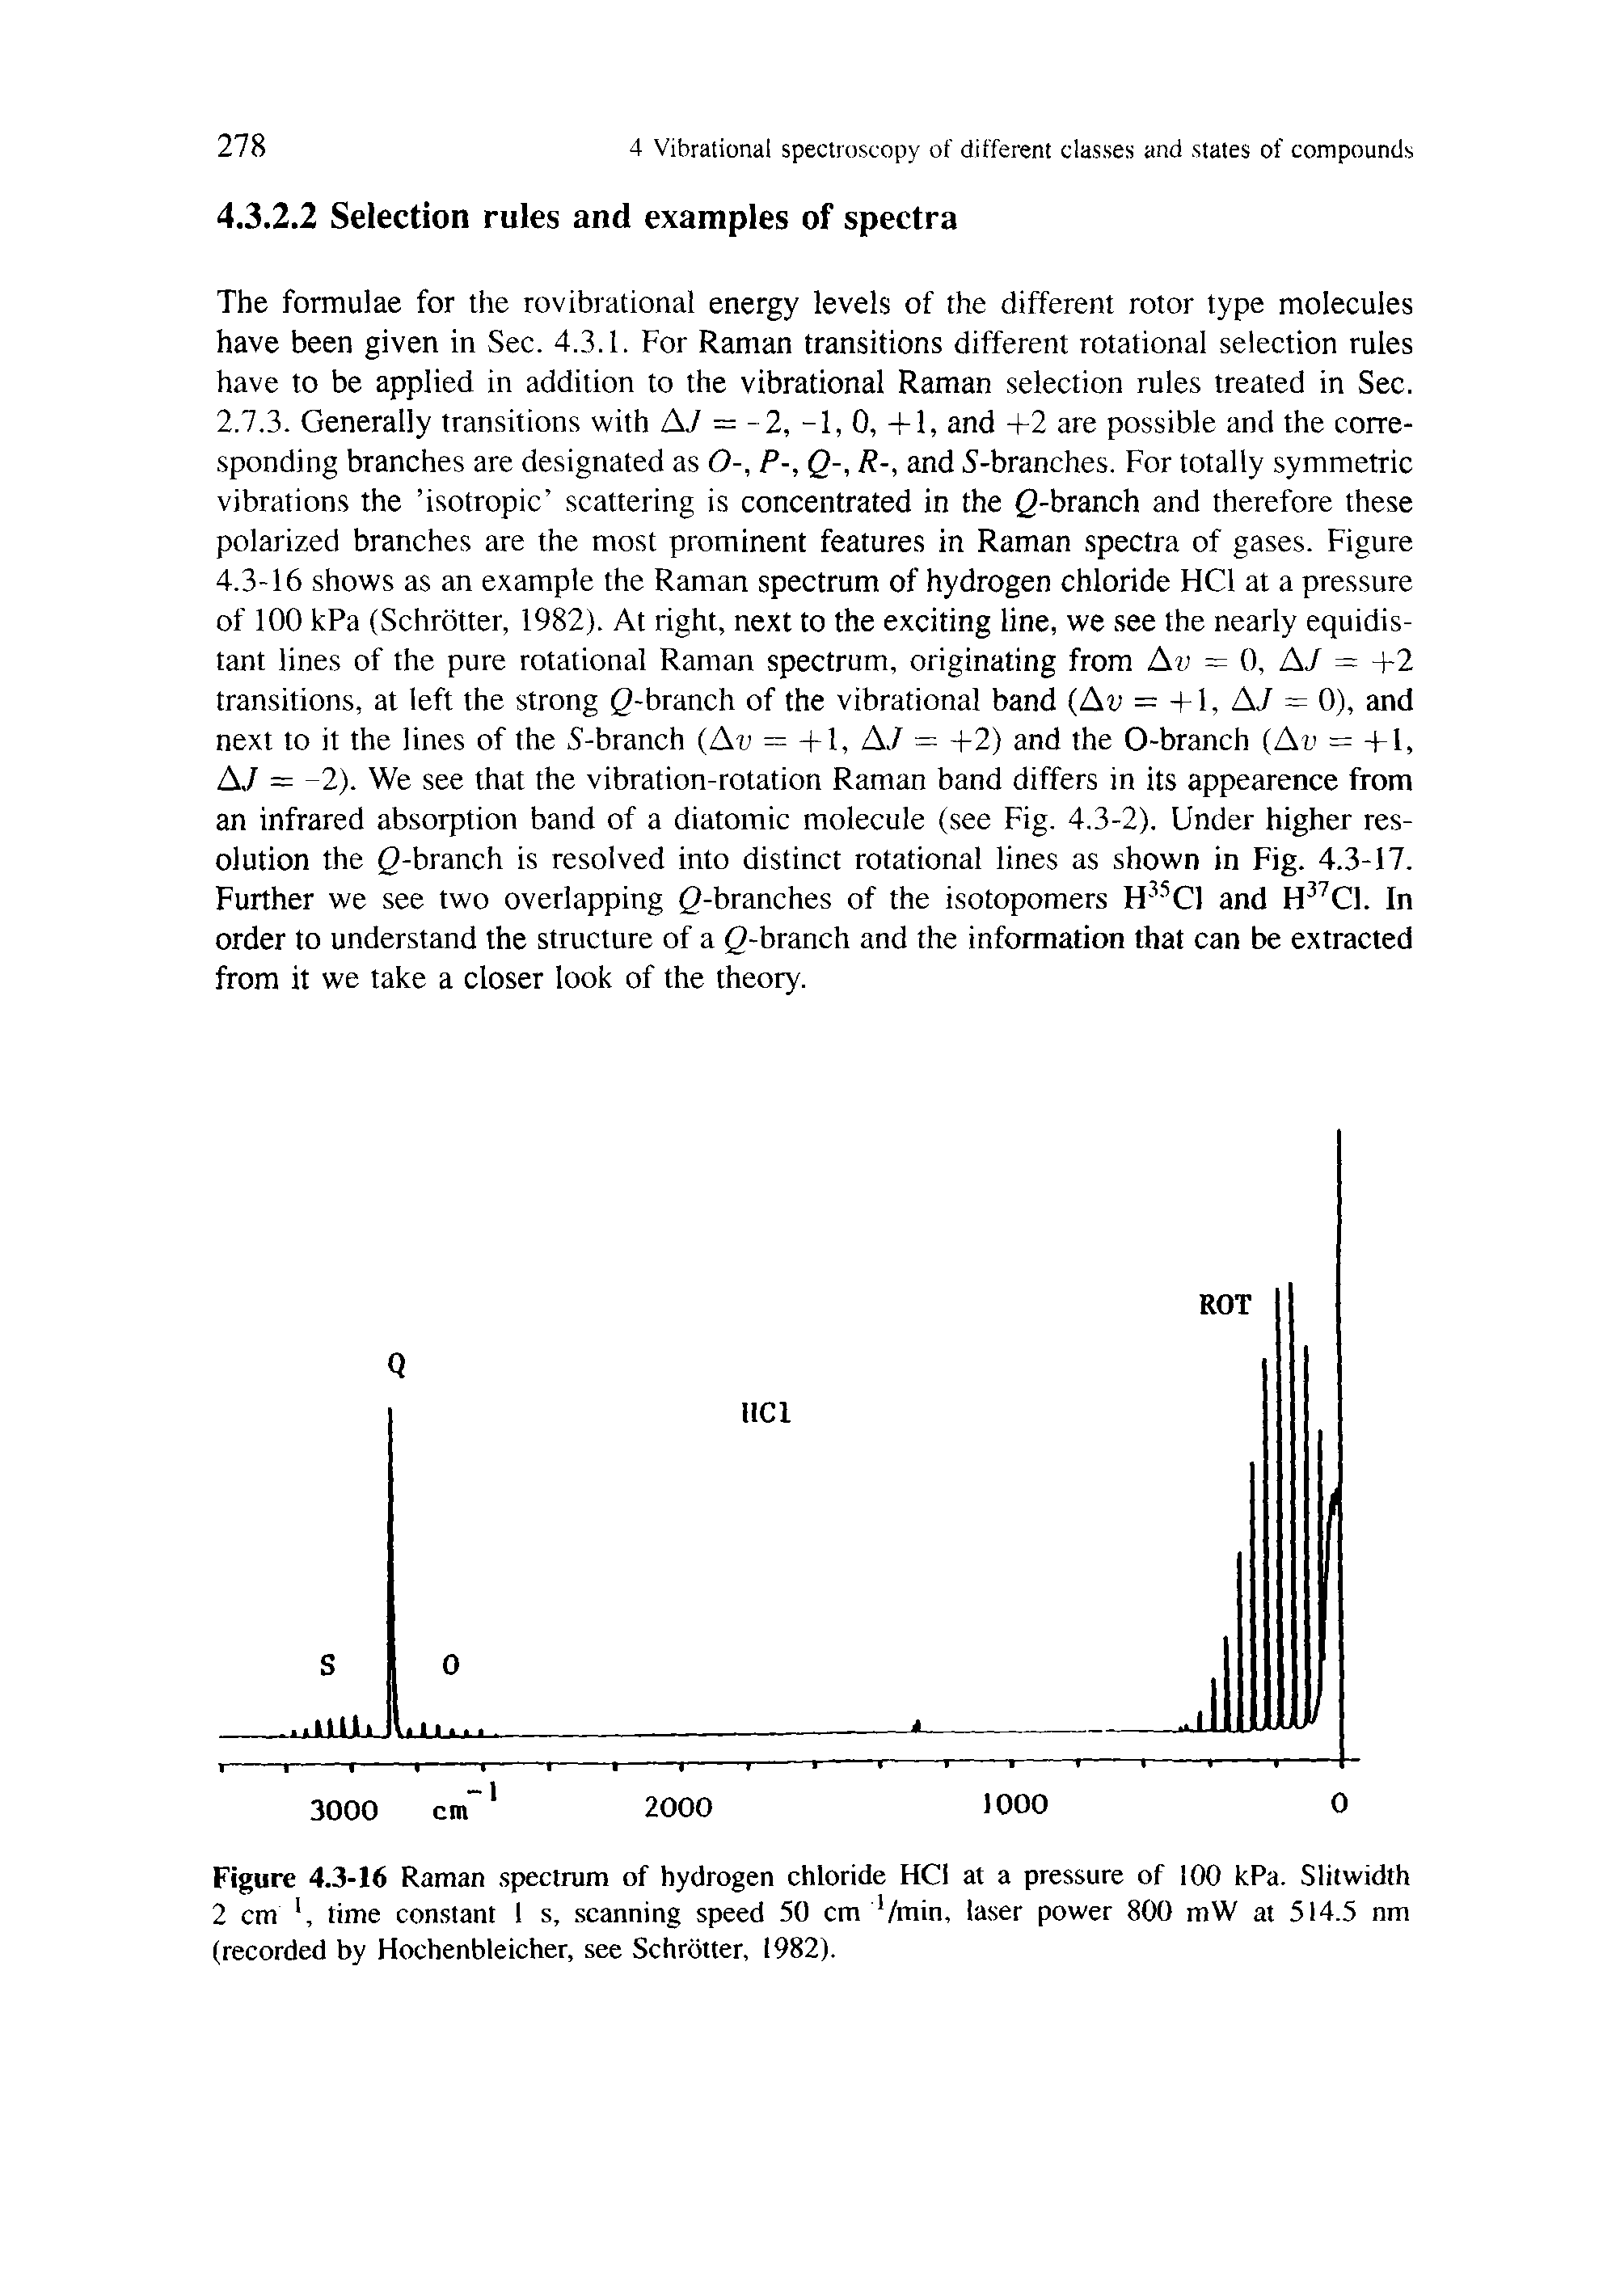 Figure 4.3-16 Raman spectrum of hydrogen chloride HCl at a pressure of 100 kPa. Slitwidth 2 cm, time constant 1 s,. scanning speed 50 cm /min, laser power 800 mW at 514.5 nm (recorded by Hochenbleicher, see Schrotter, 1982).